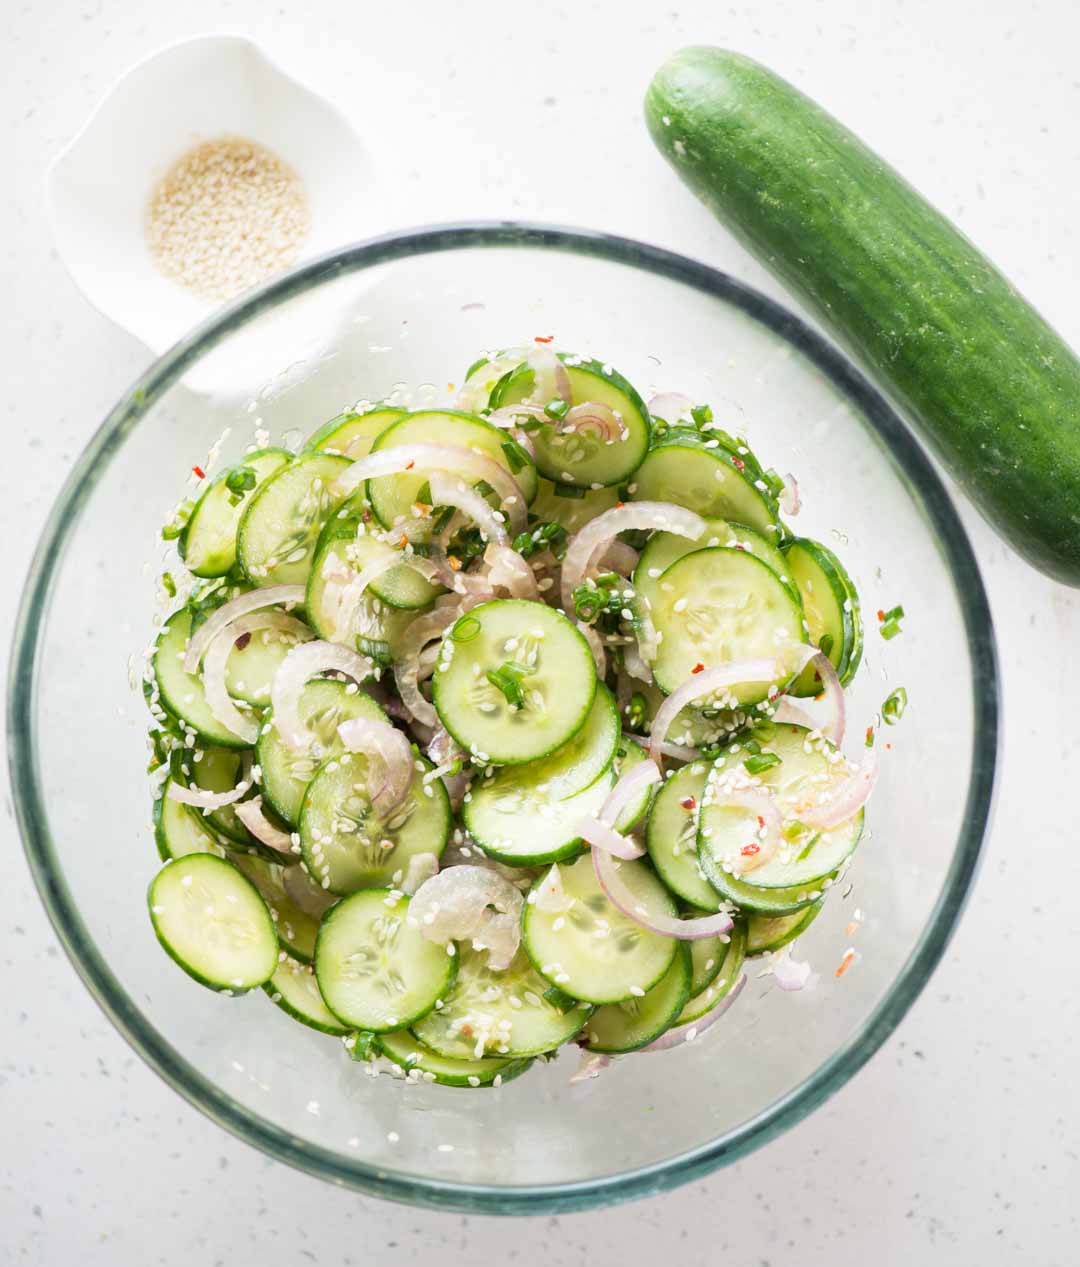 Ingredients for cucumber salad tossed in a large bowl.